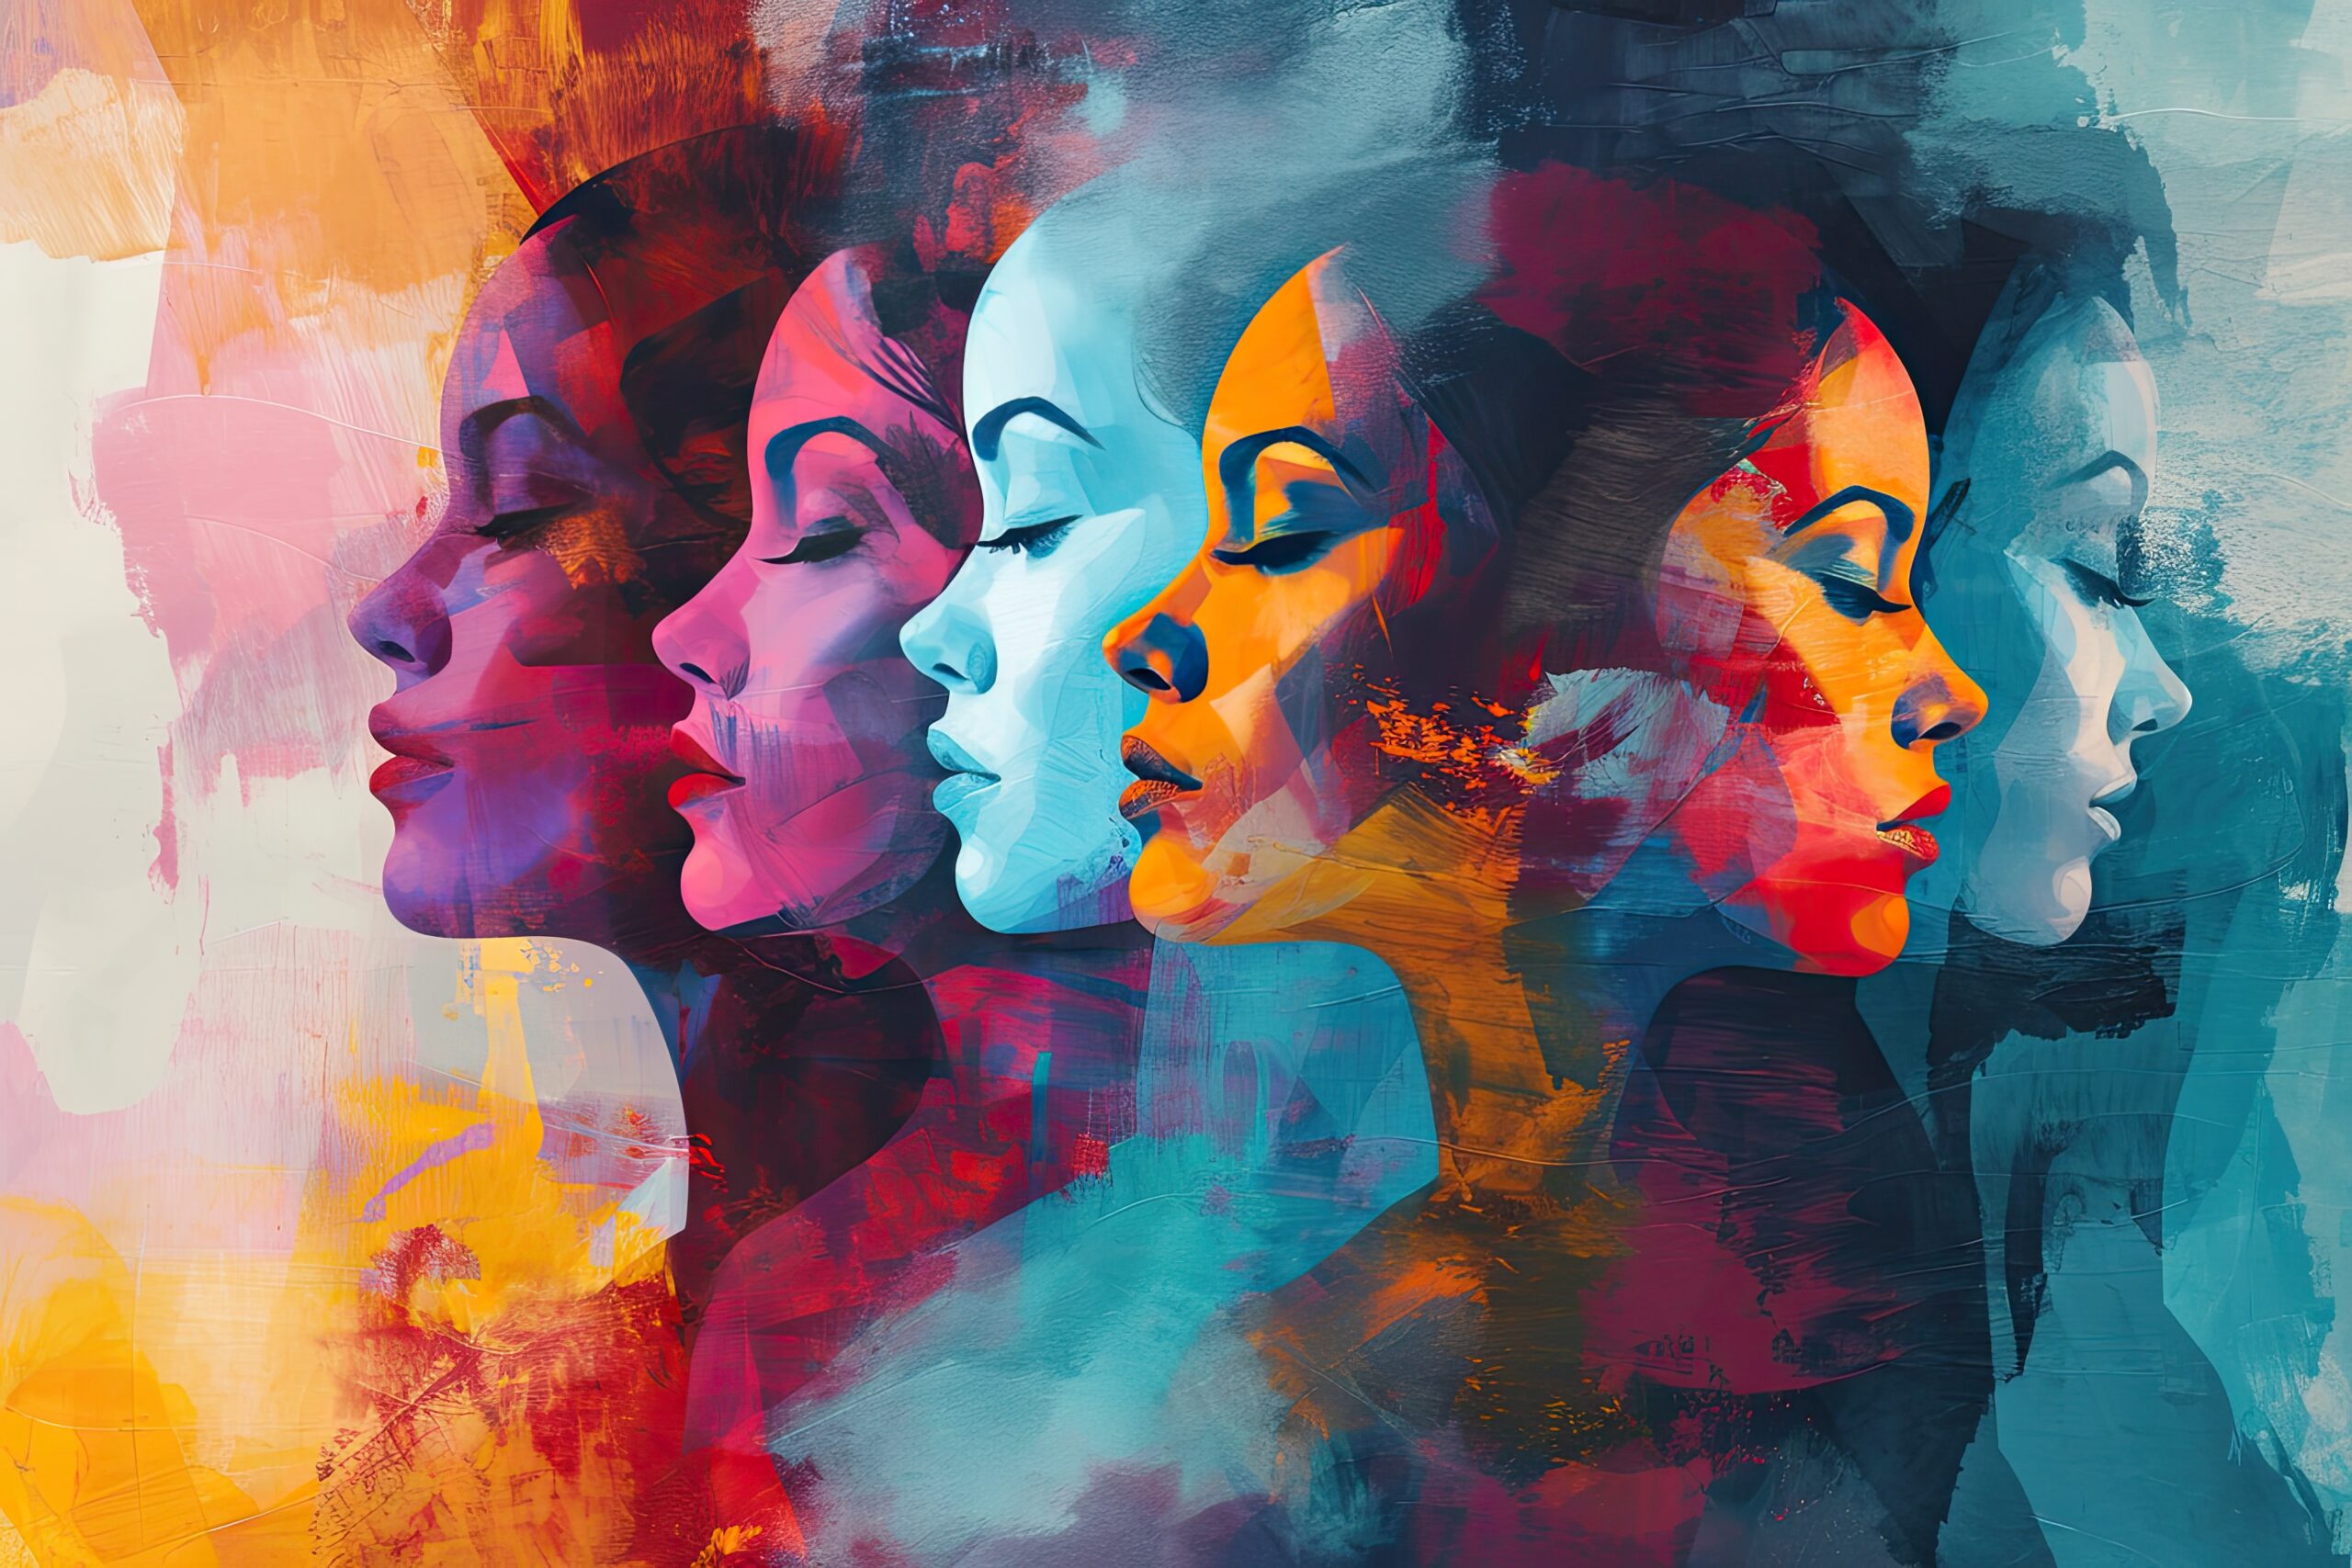 Colorful illustration of a group of women